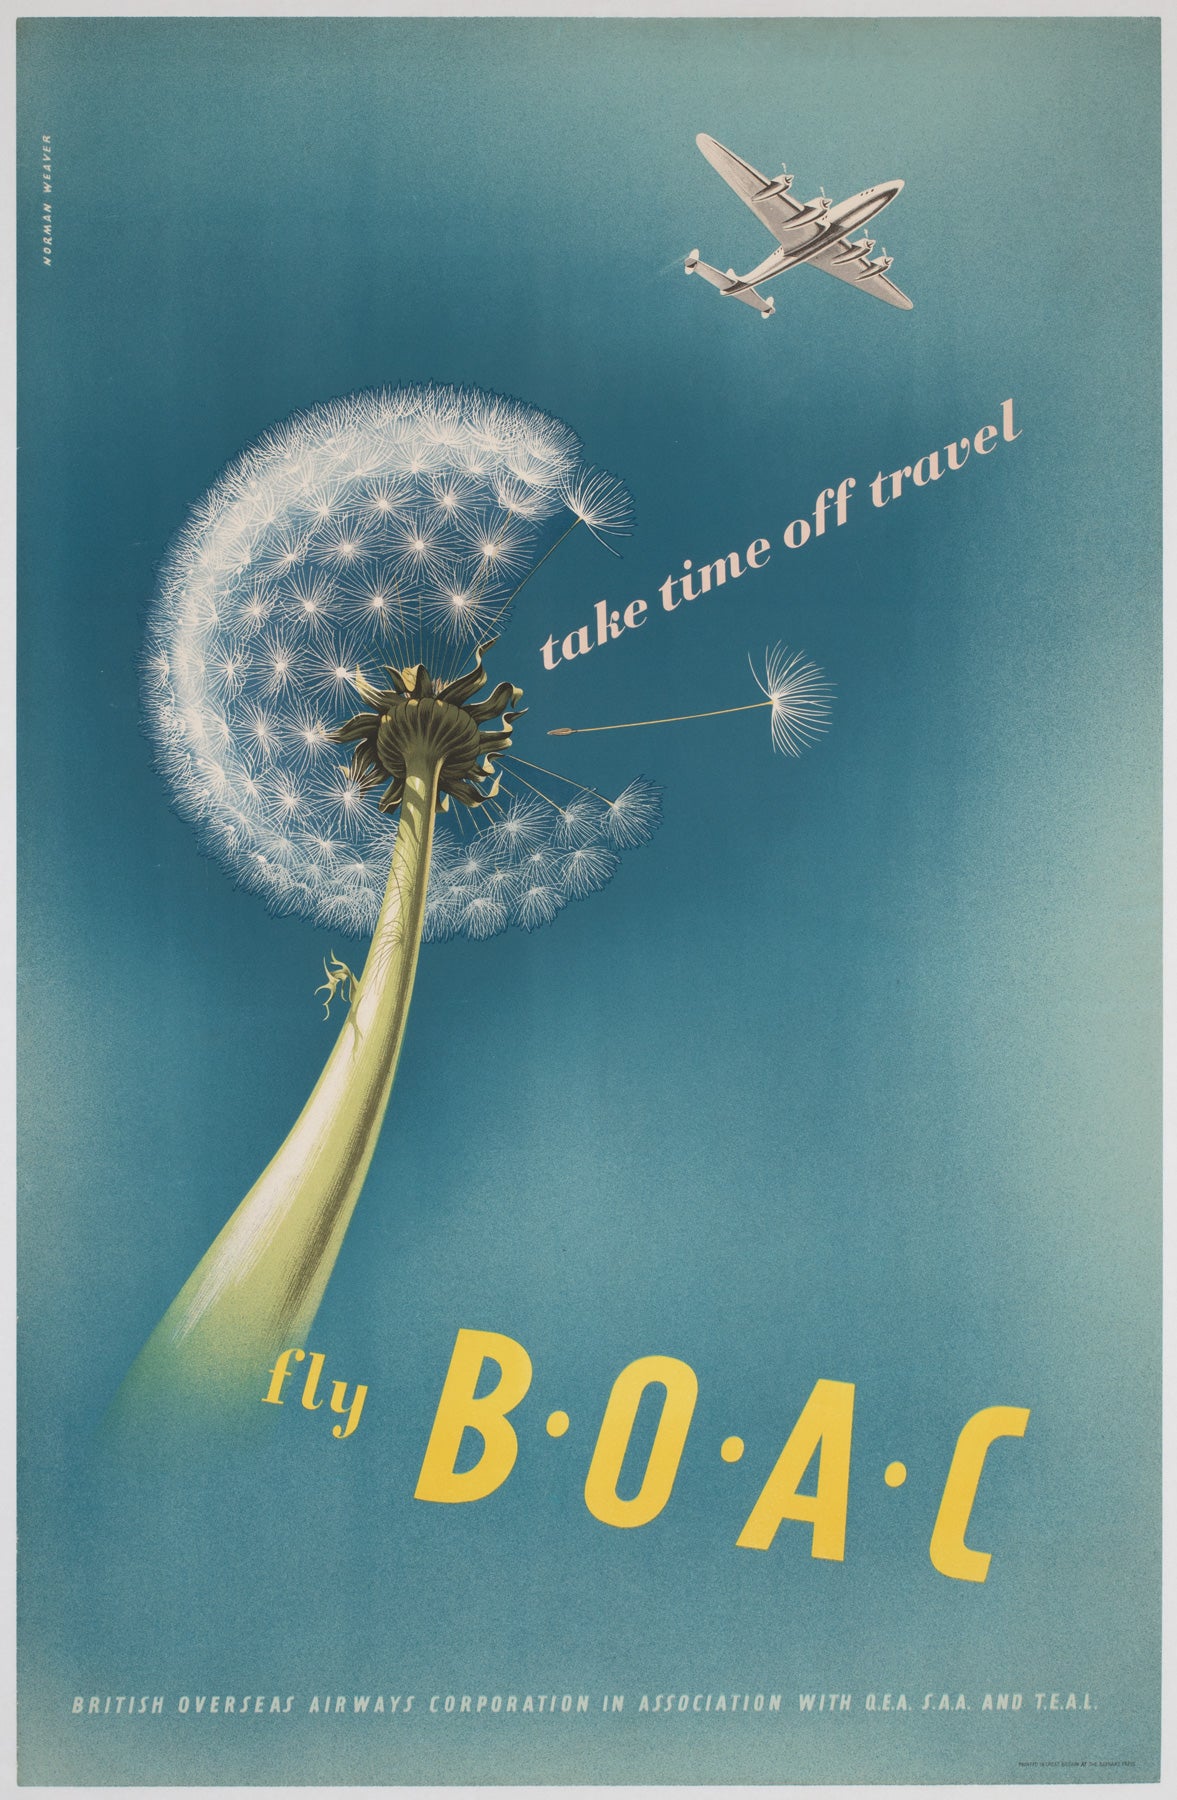 BOAC c1950s Travel Airline Poster, Norman Weaver